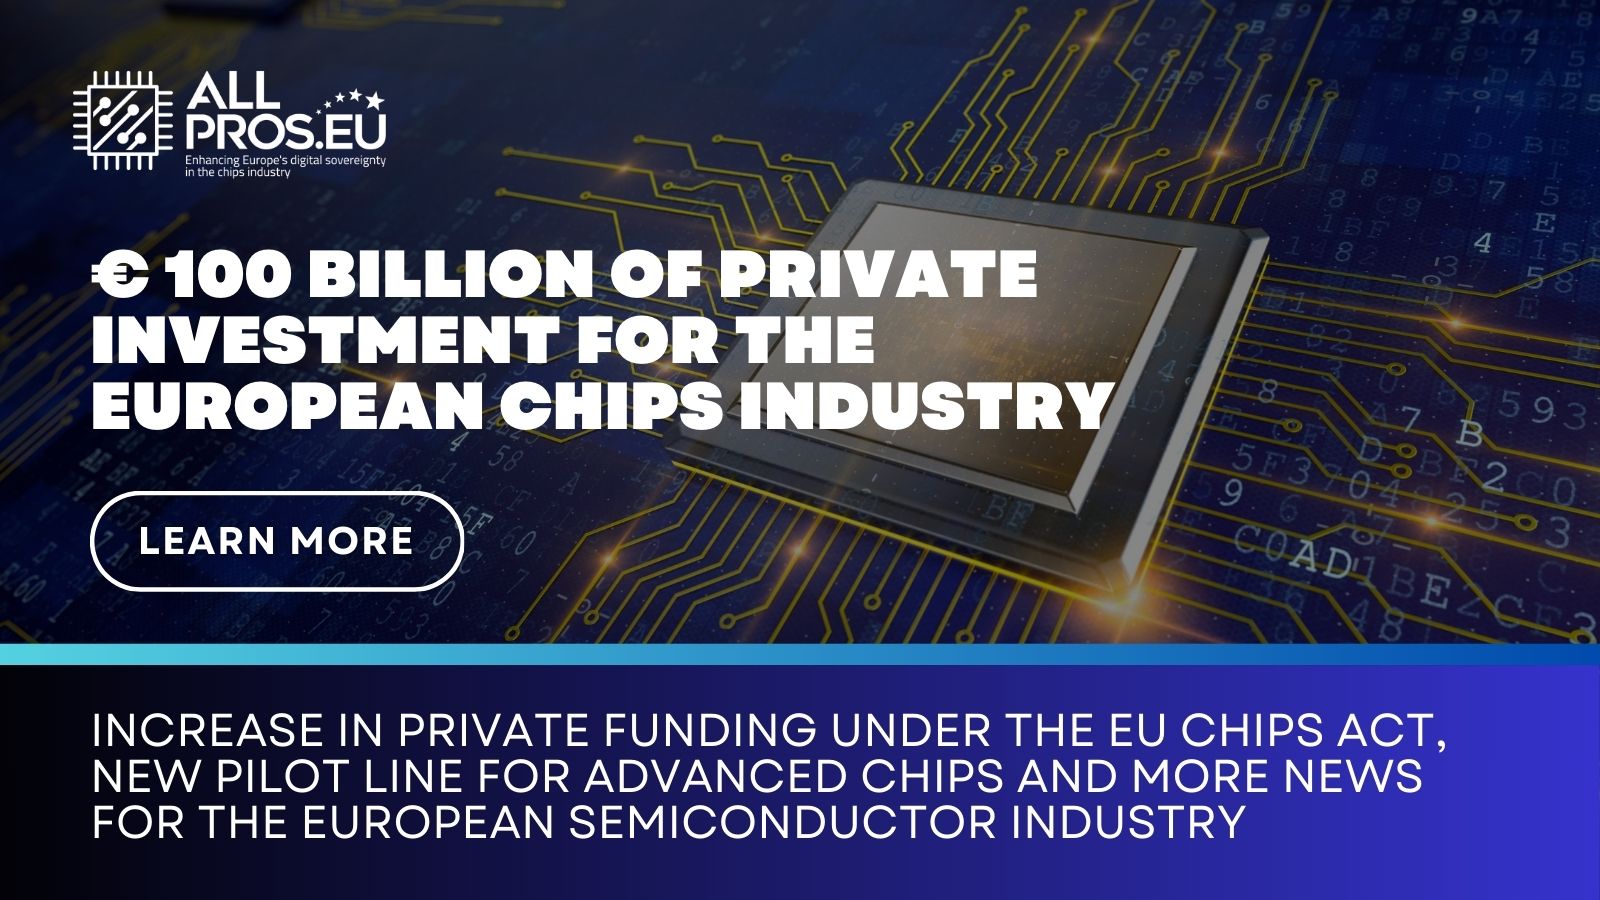 € 100 billion of private investment for the European semiconductor industry